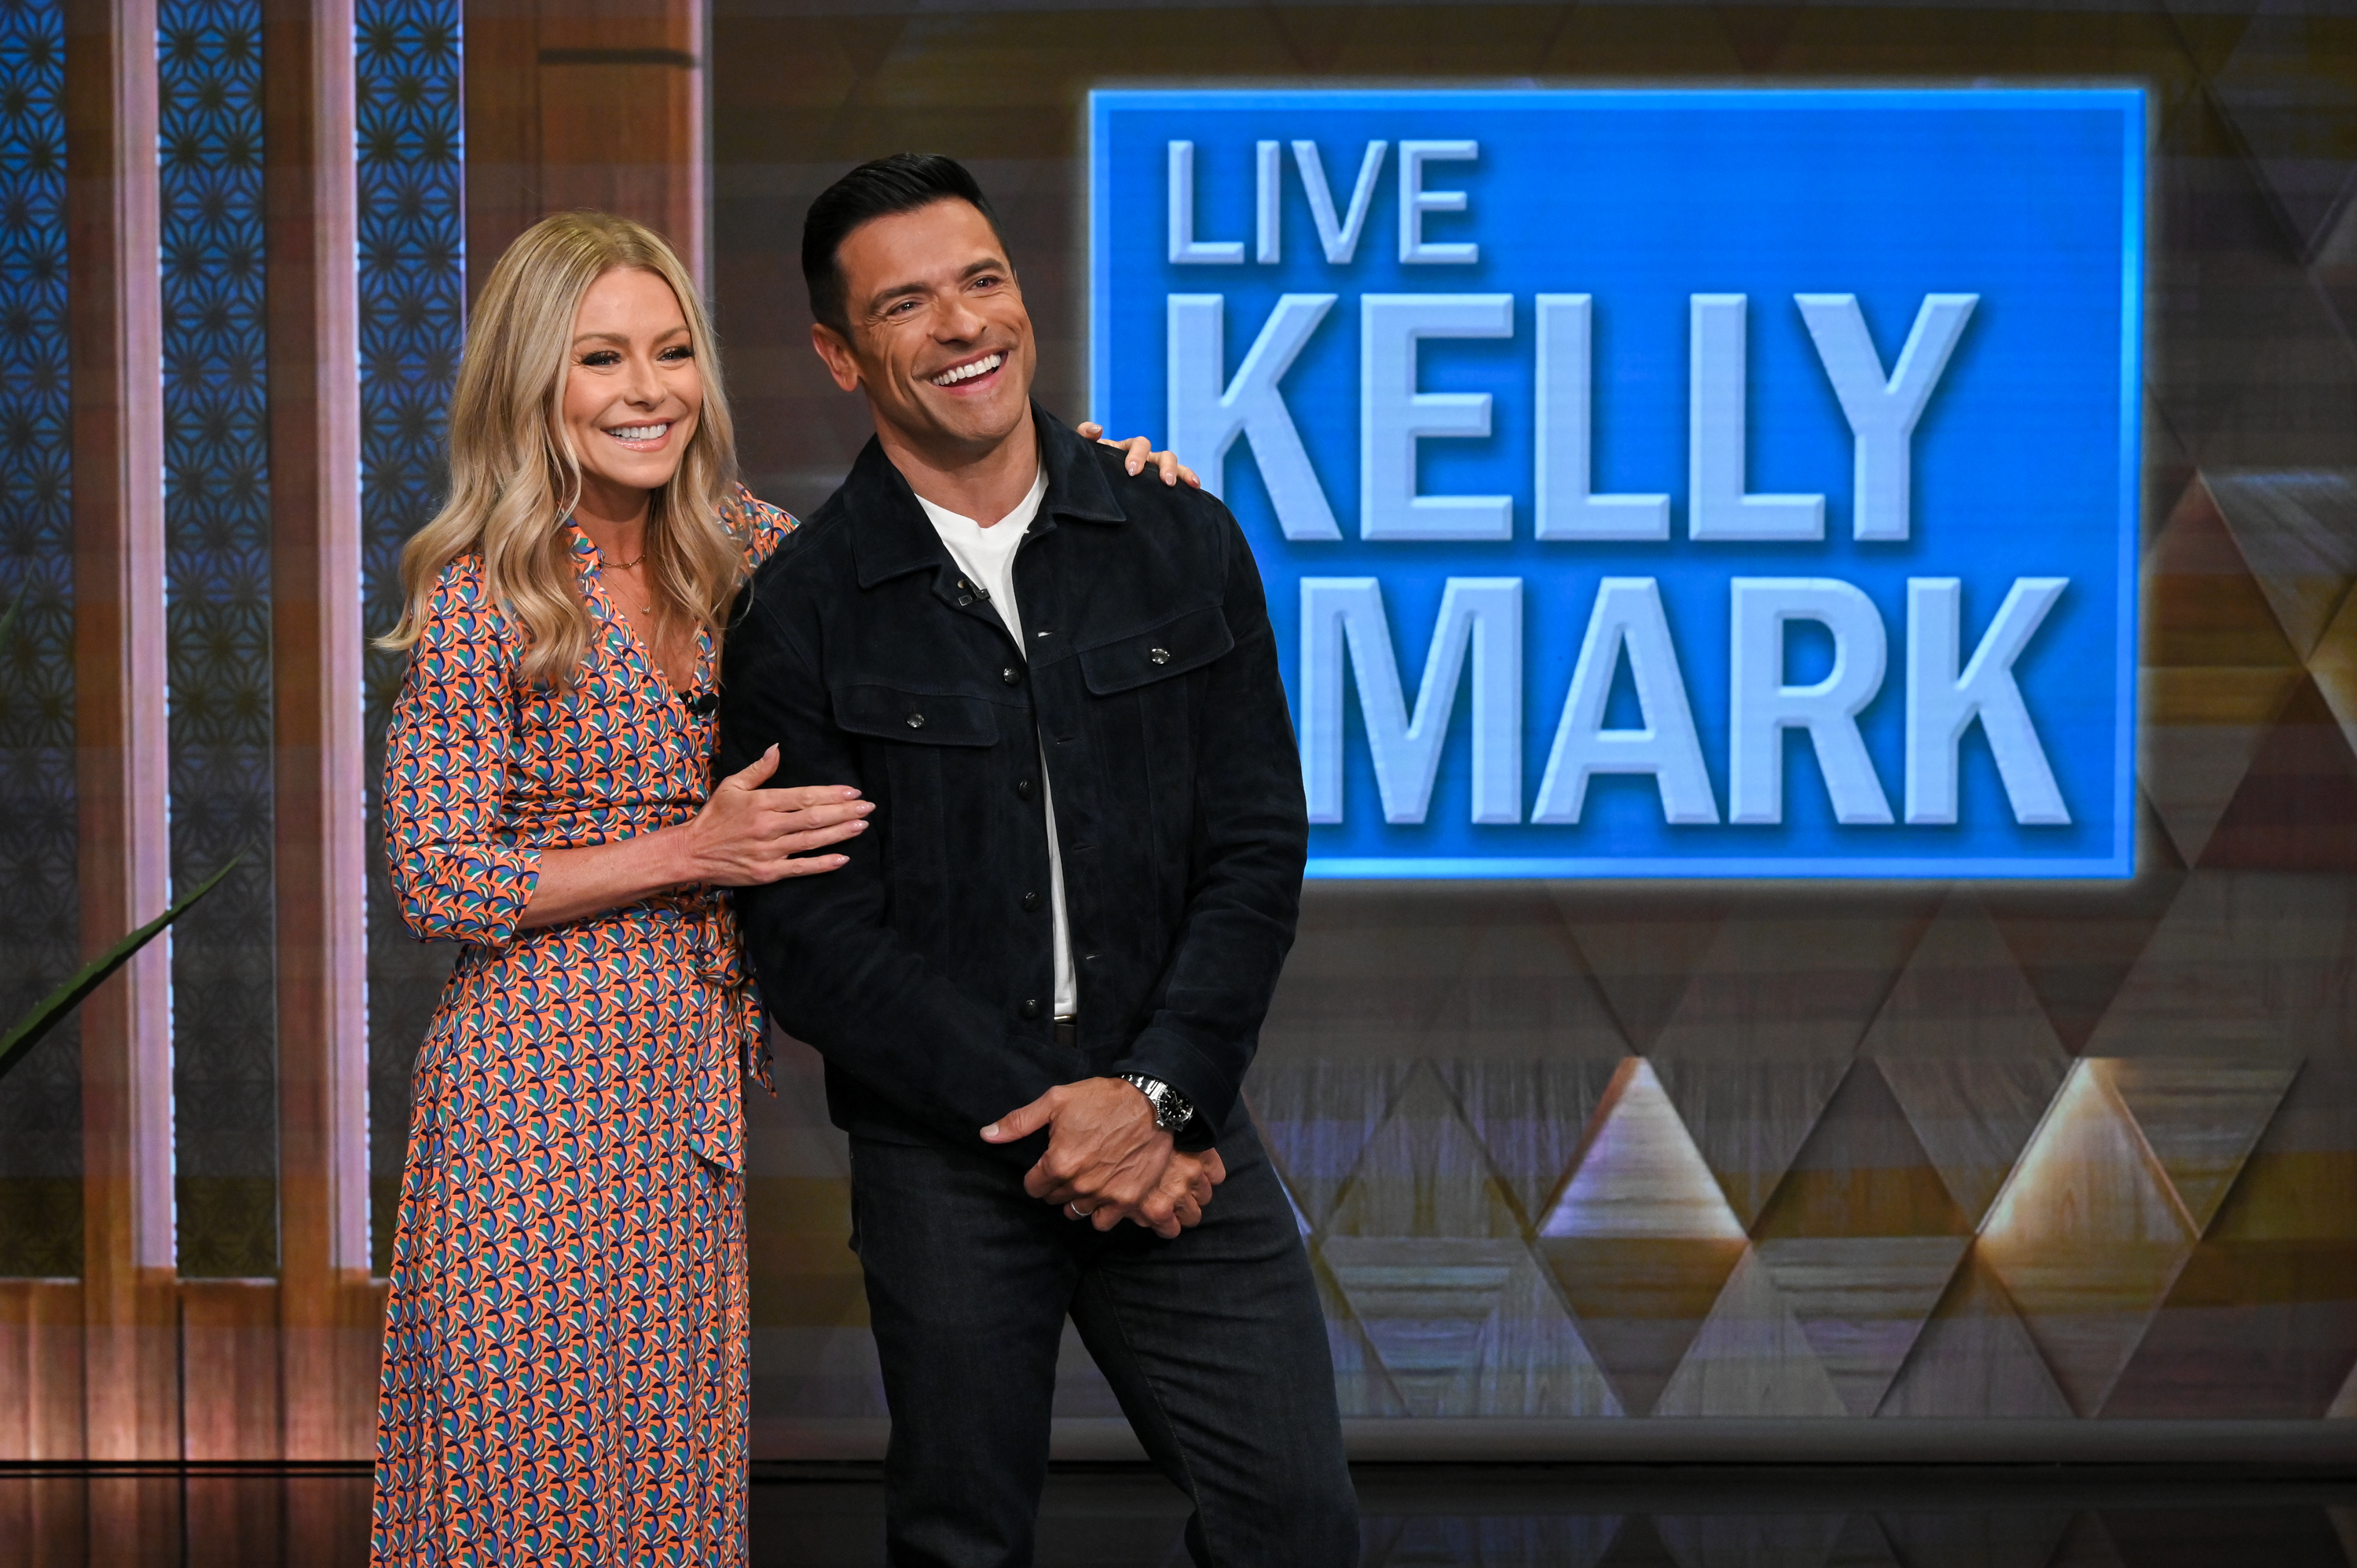 Mark joined Kelly as her co-host in April, replacing Ryan Seacrest